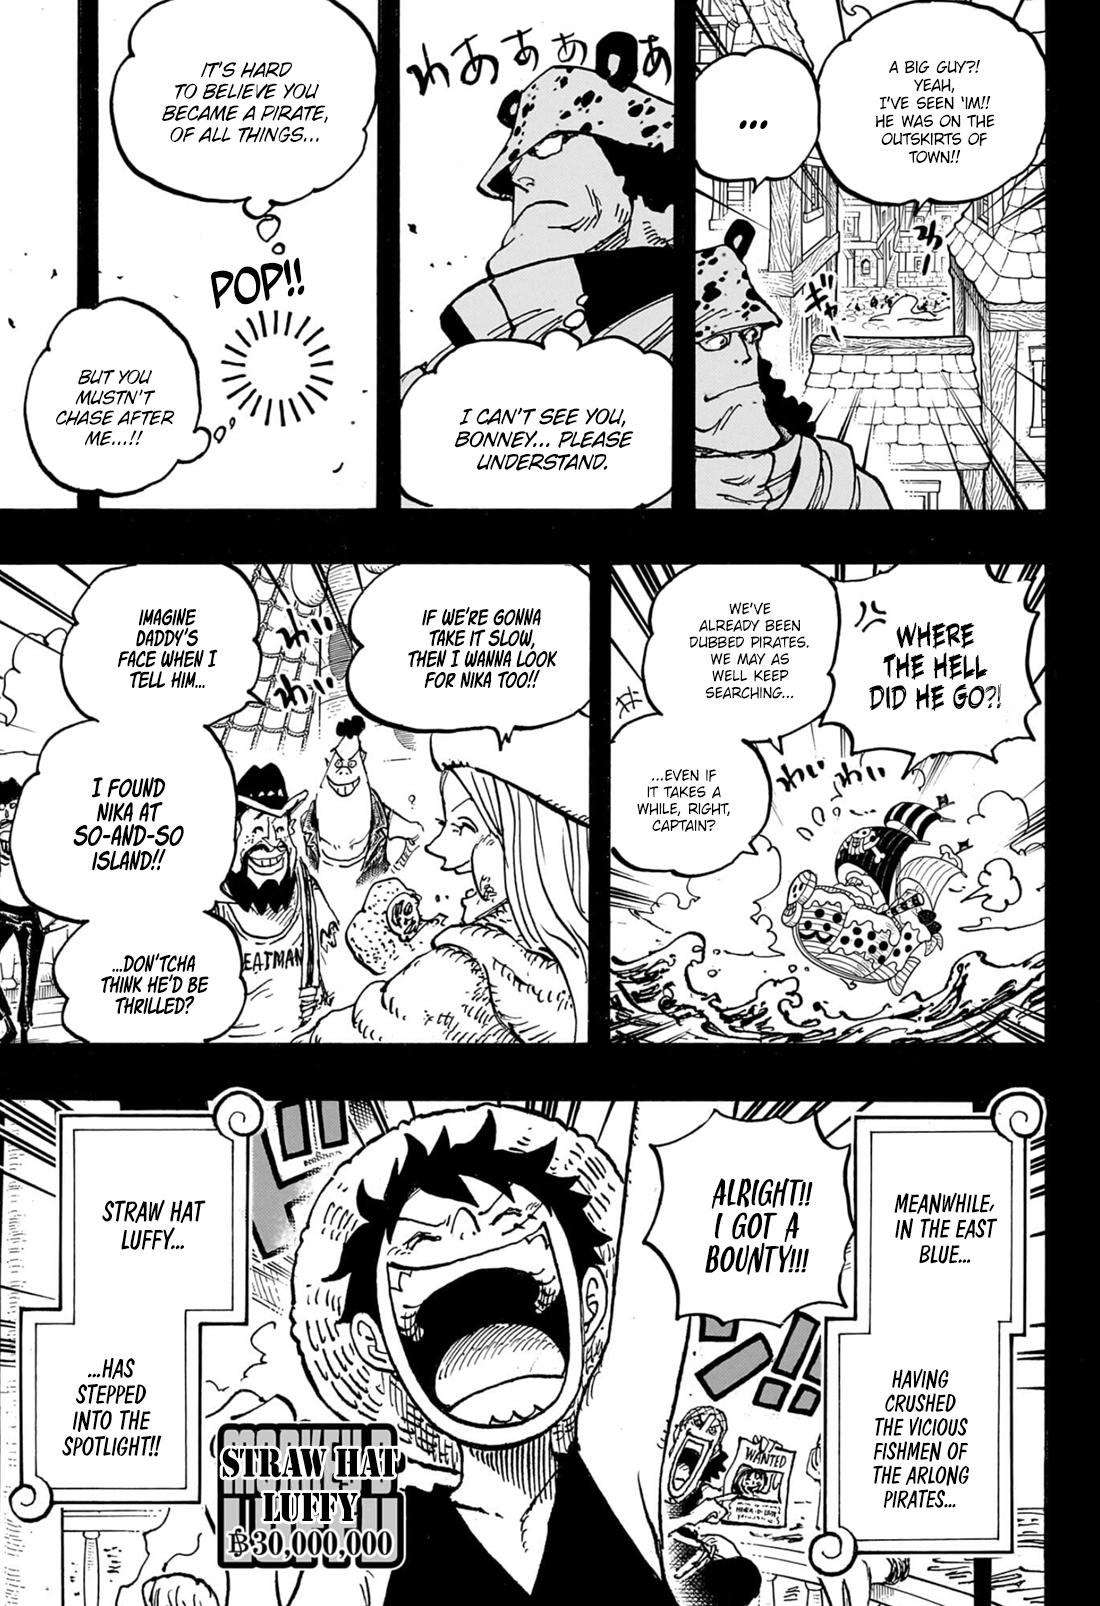 One Piece, Chapter 1102 | TcbScans Org - Free Manga Online in High 